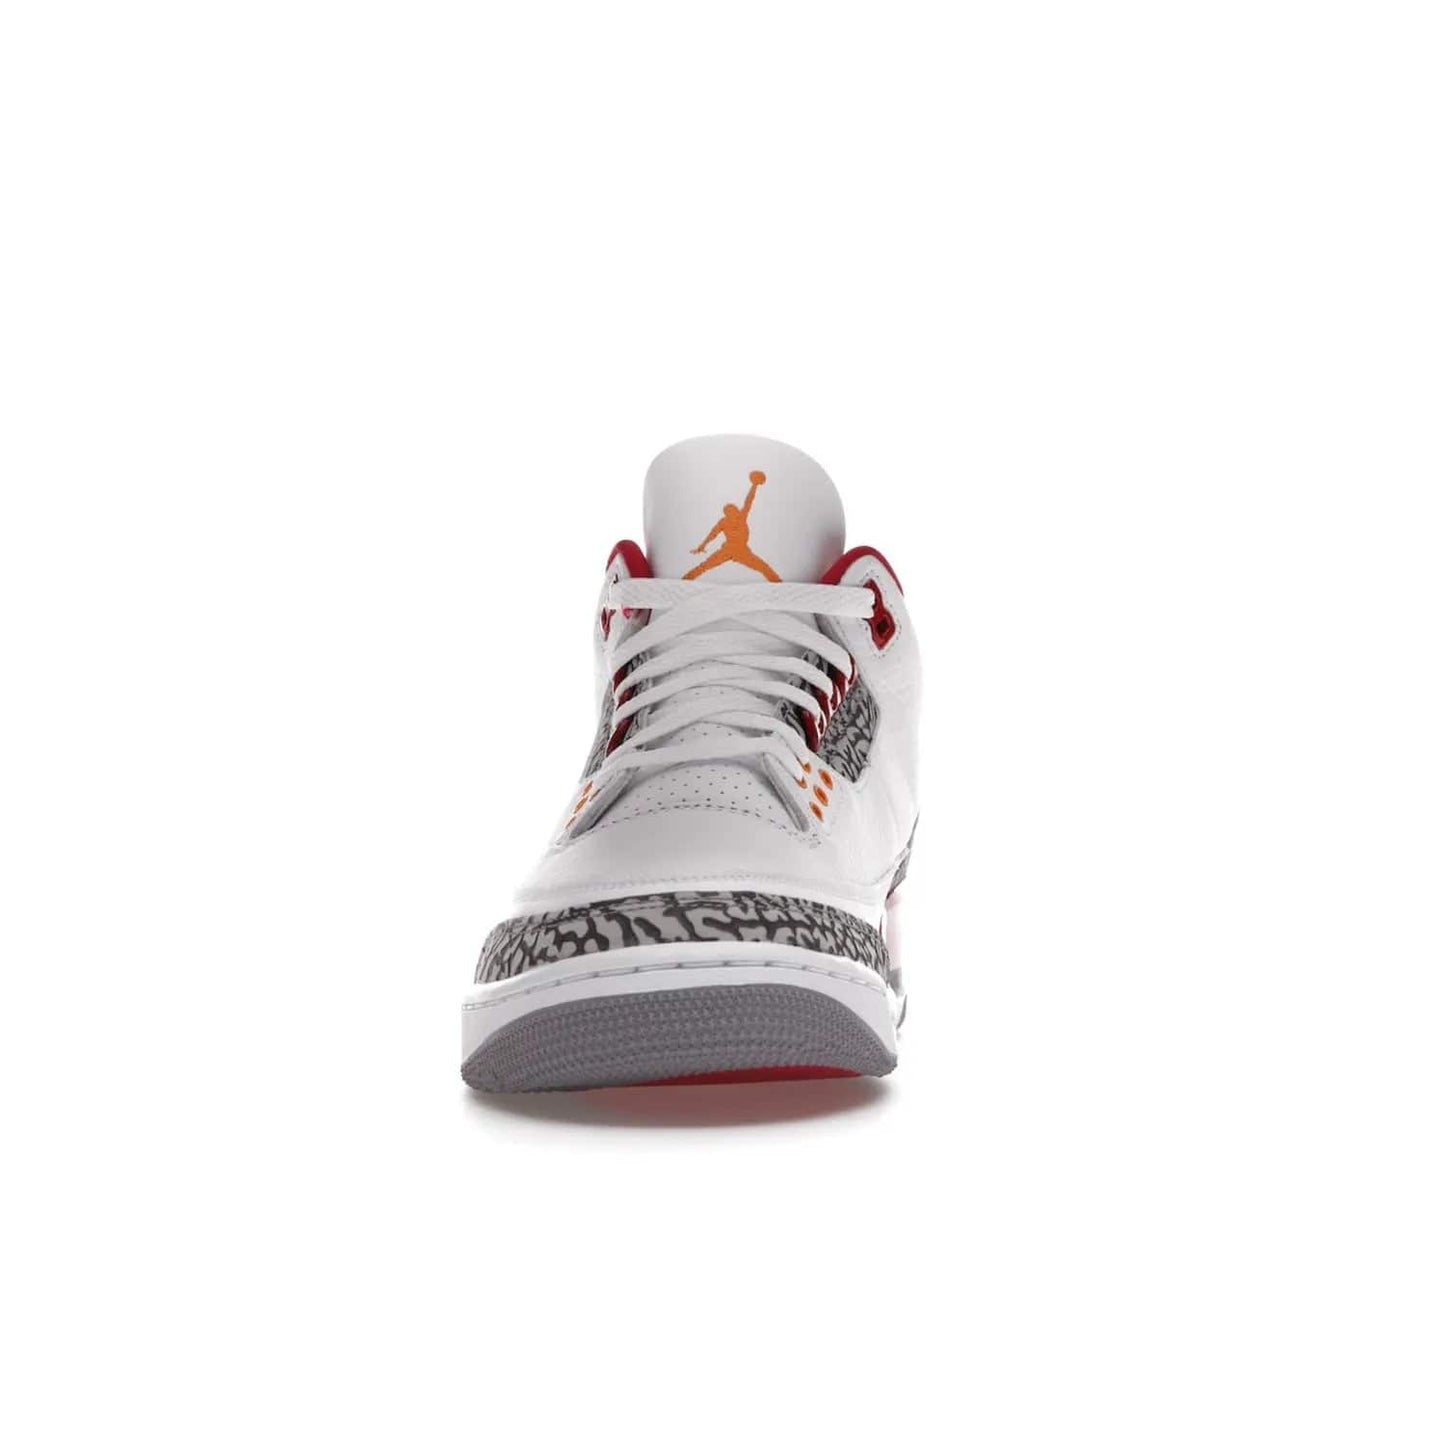 Jordan 3 Retro Cardinal Red - Image 11 - Only at www.BallersClubKickz.com - Air Jordan 3 Retro Cardinal Red combines classic style and modern appeal - white tumbled leather, signature Elephant Print overlays, cardinal red midsoles, Jumpman logo embroidery. Available Feb 2022.